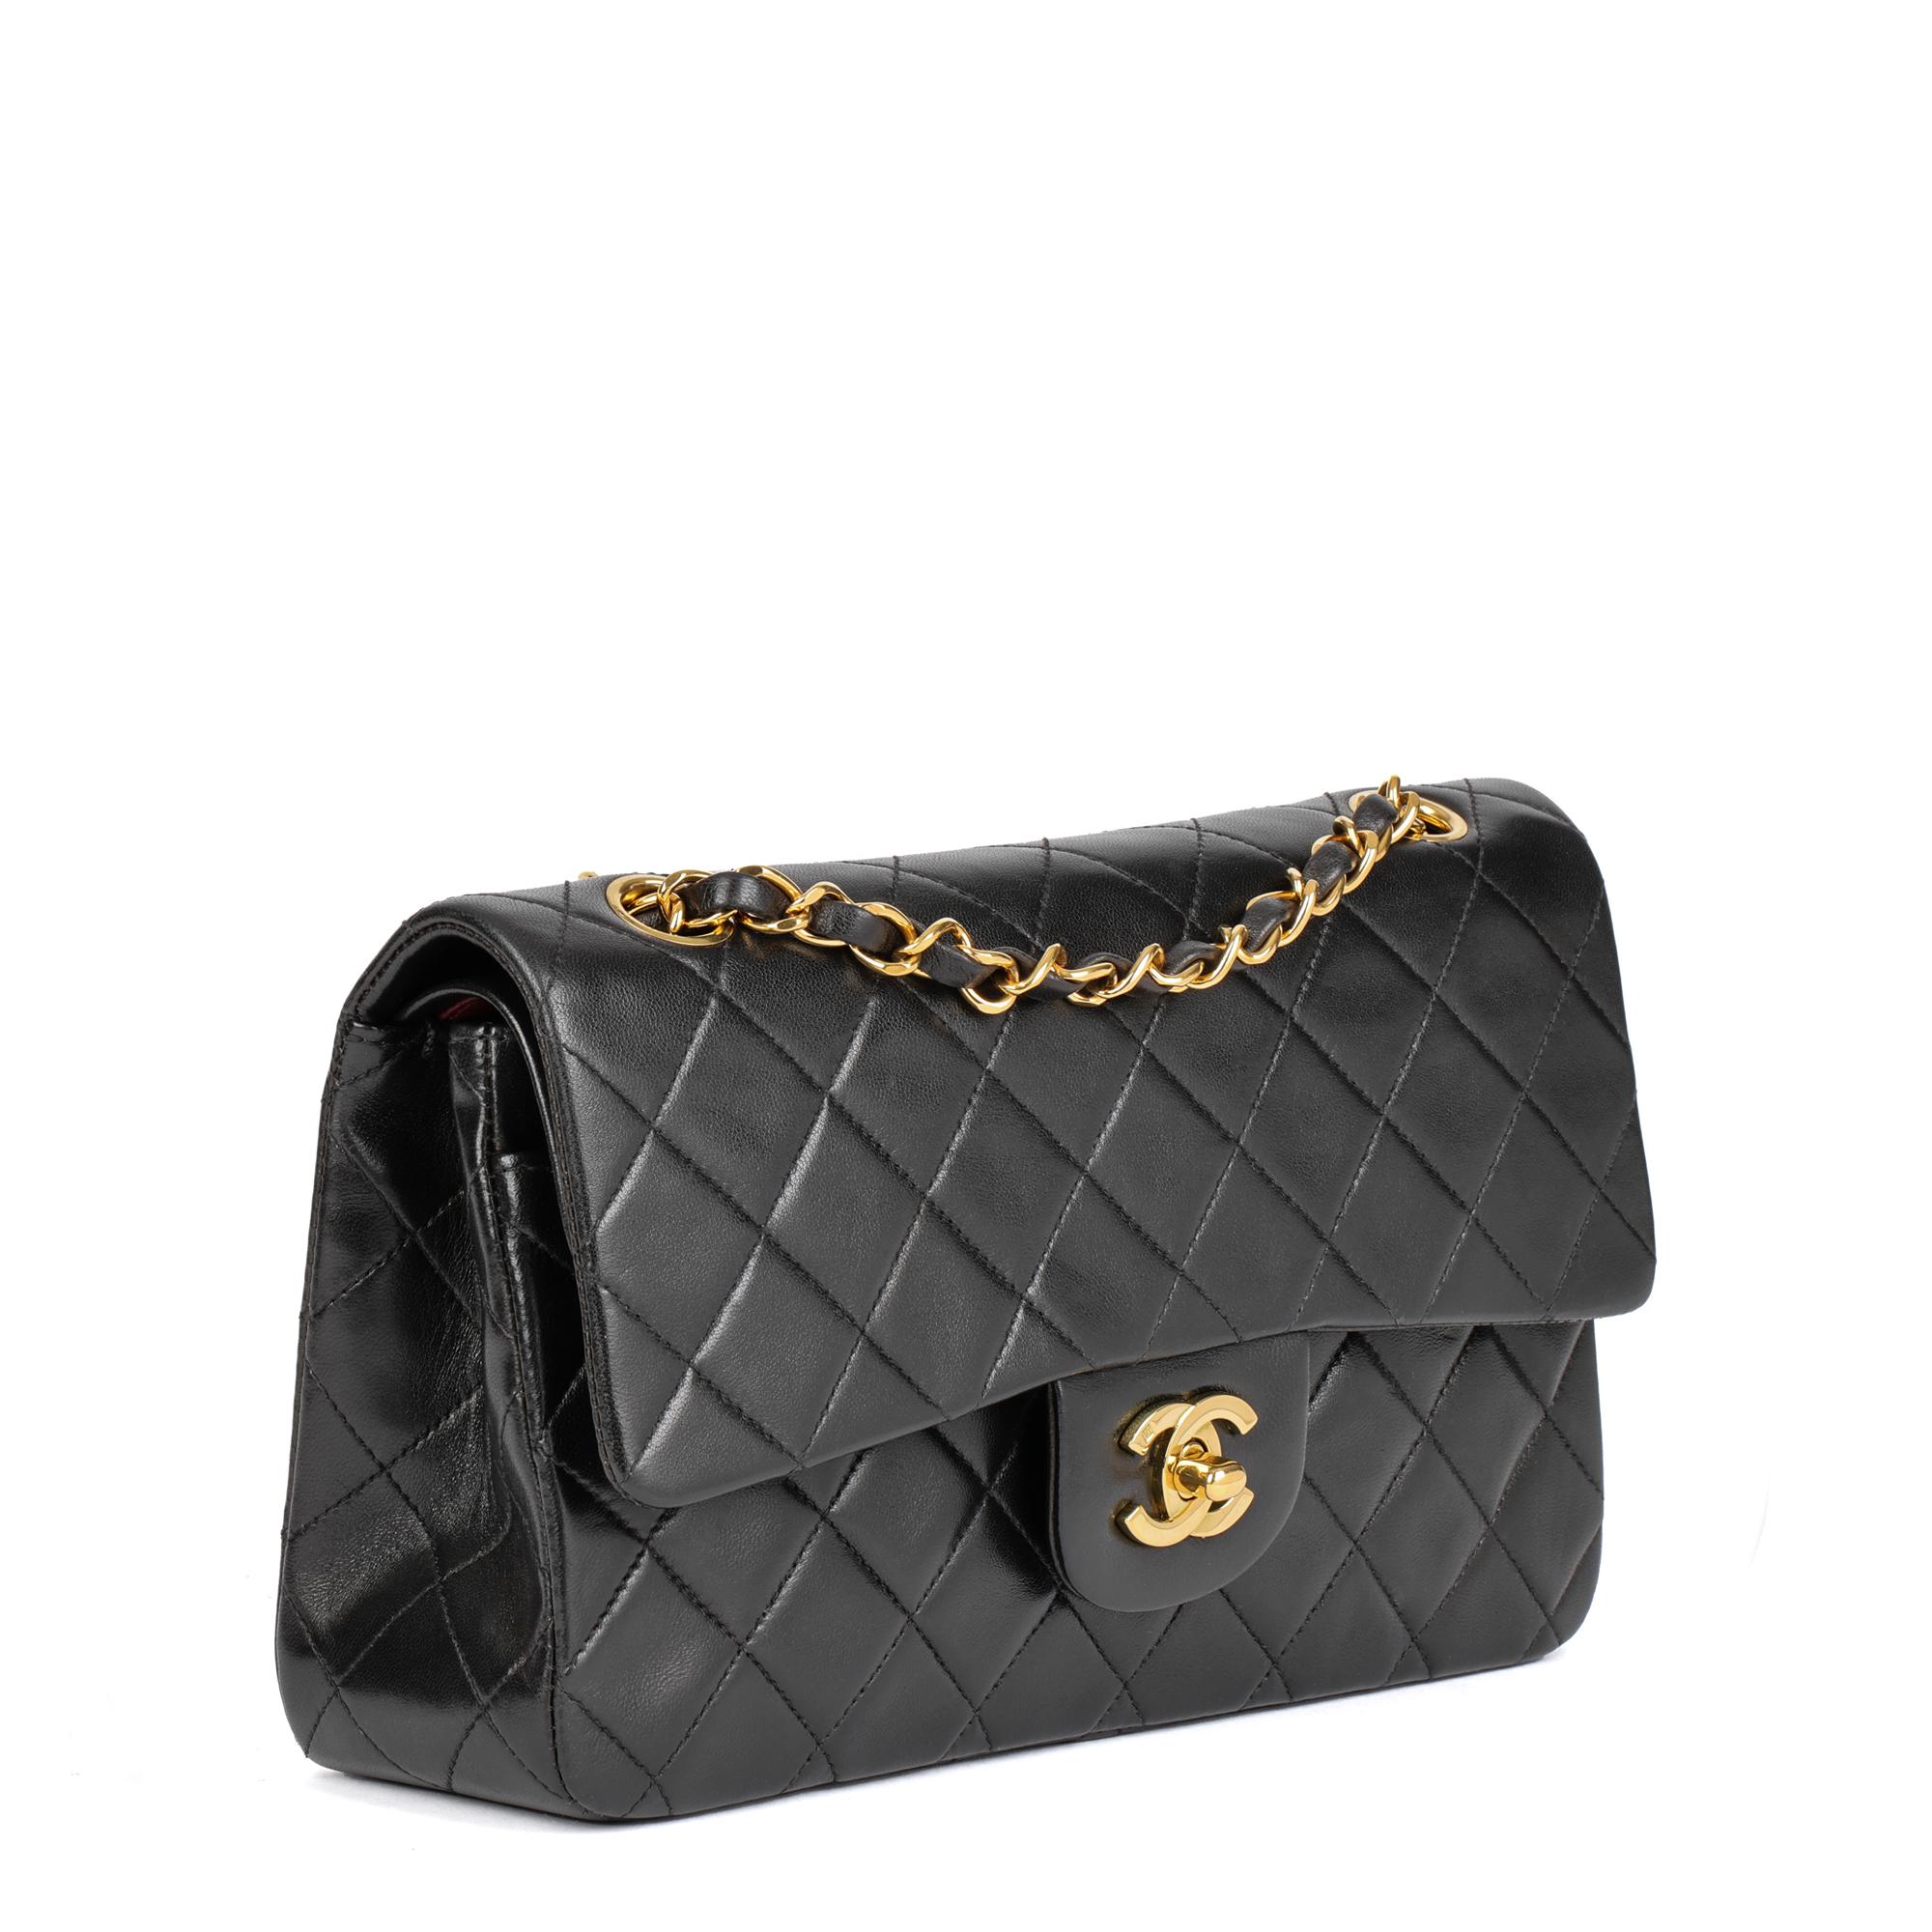 CHANEL
Black Quilted Lambskin Vintage Small Classic Double Flap Bag

Serial Number: 2834975
Age (Circa): 1993
Accompanied By: Chanel Dust Bag, Authenticity Card
Authenticity Details: Authenticity Card, Serial Sticker (Made In France)
Gender: